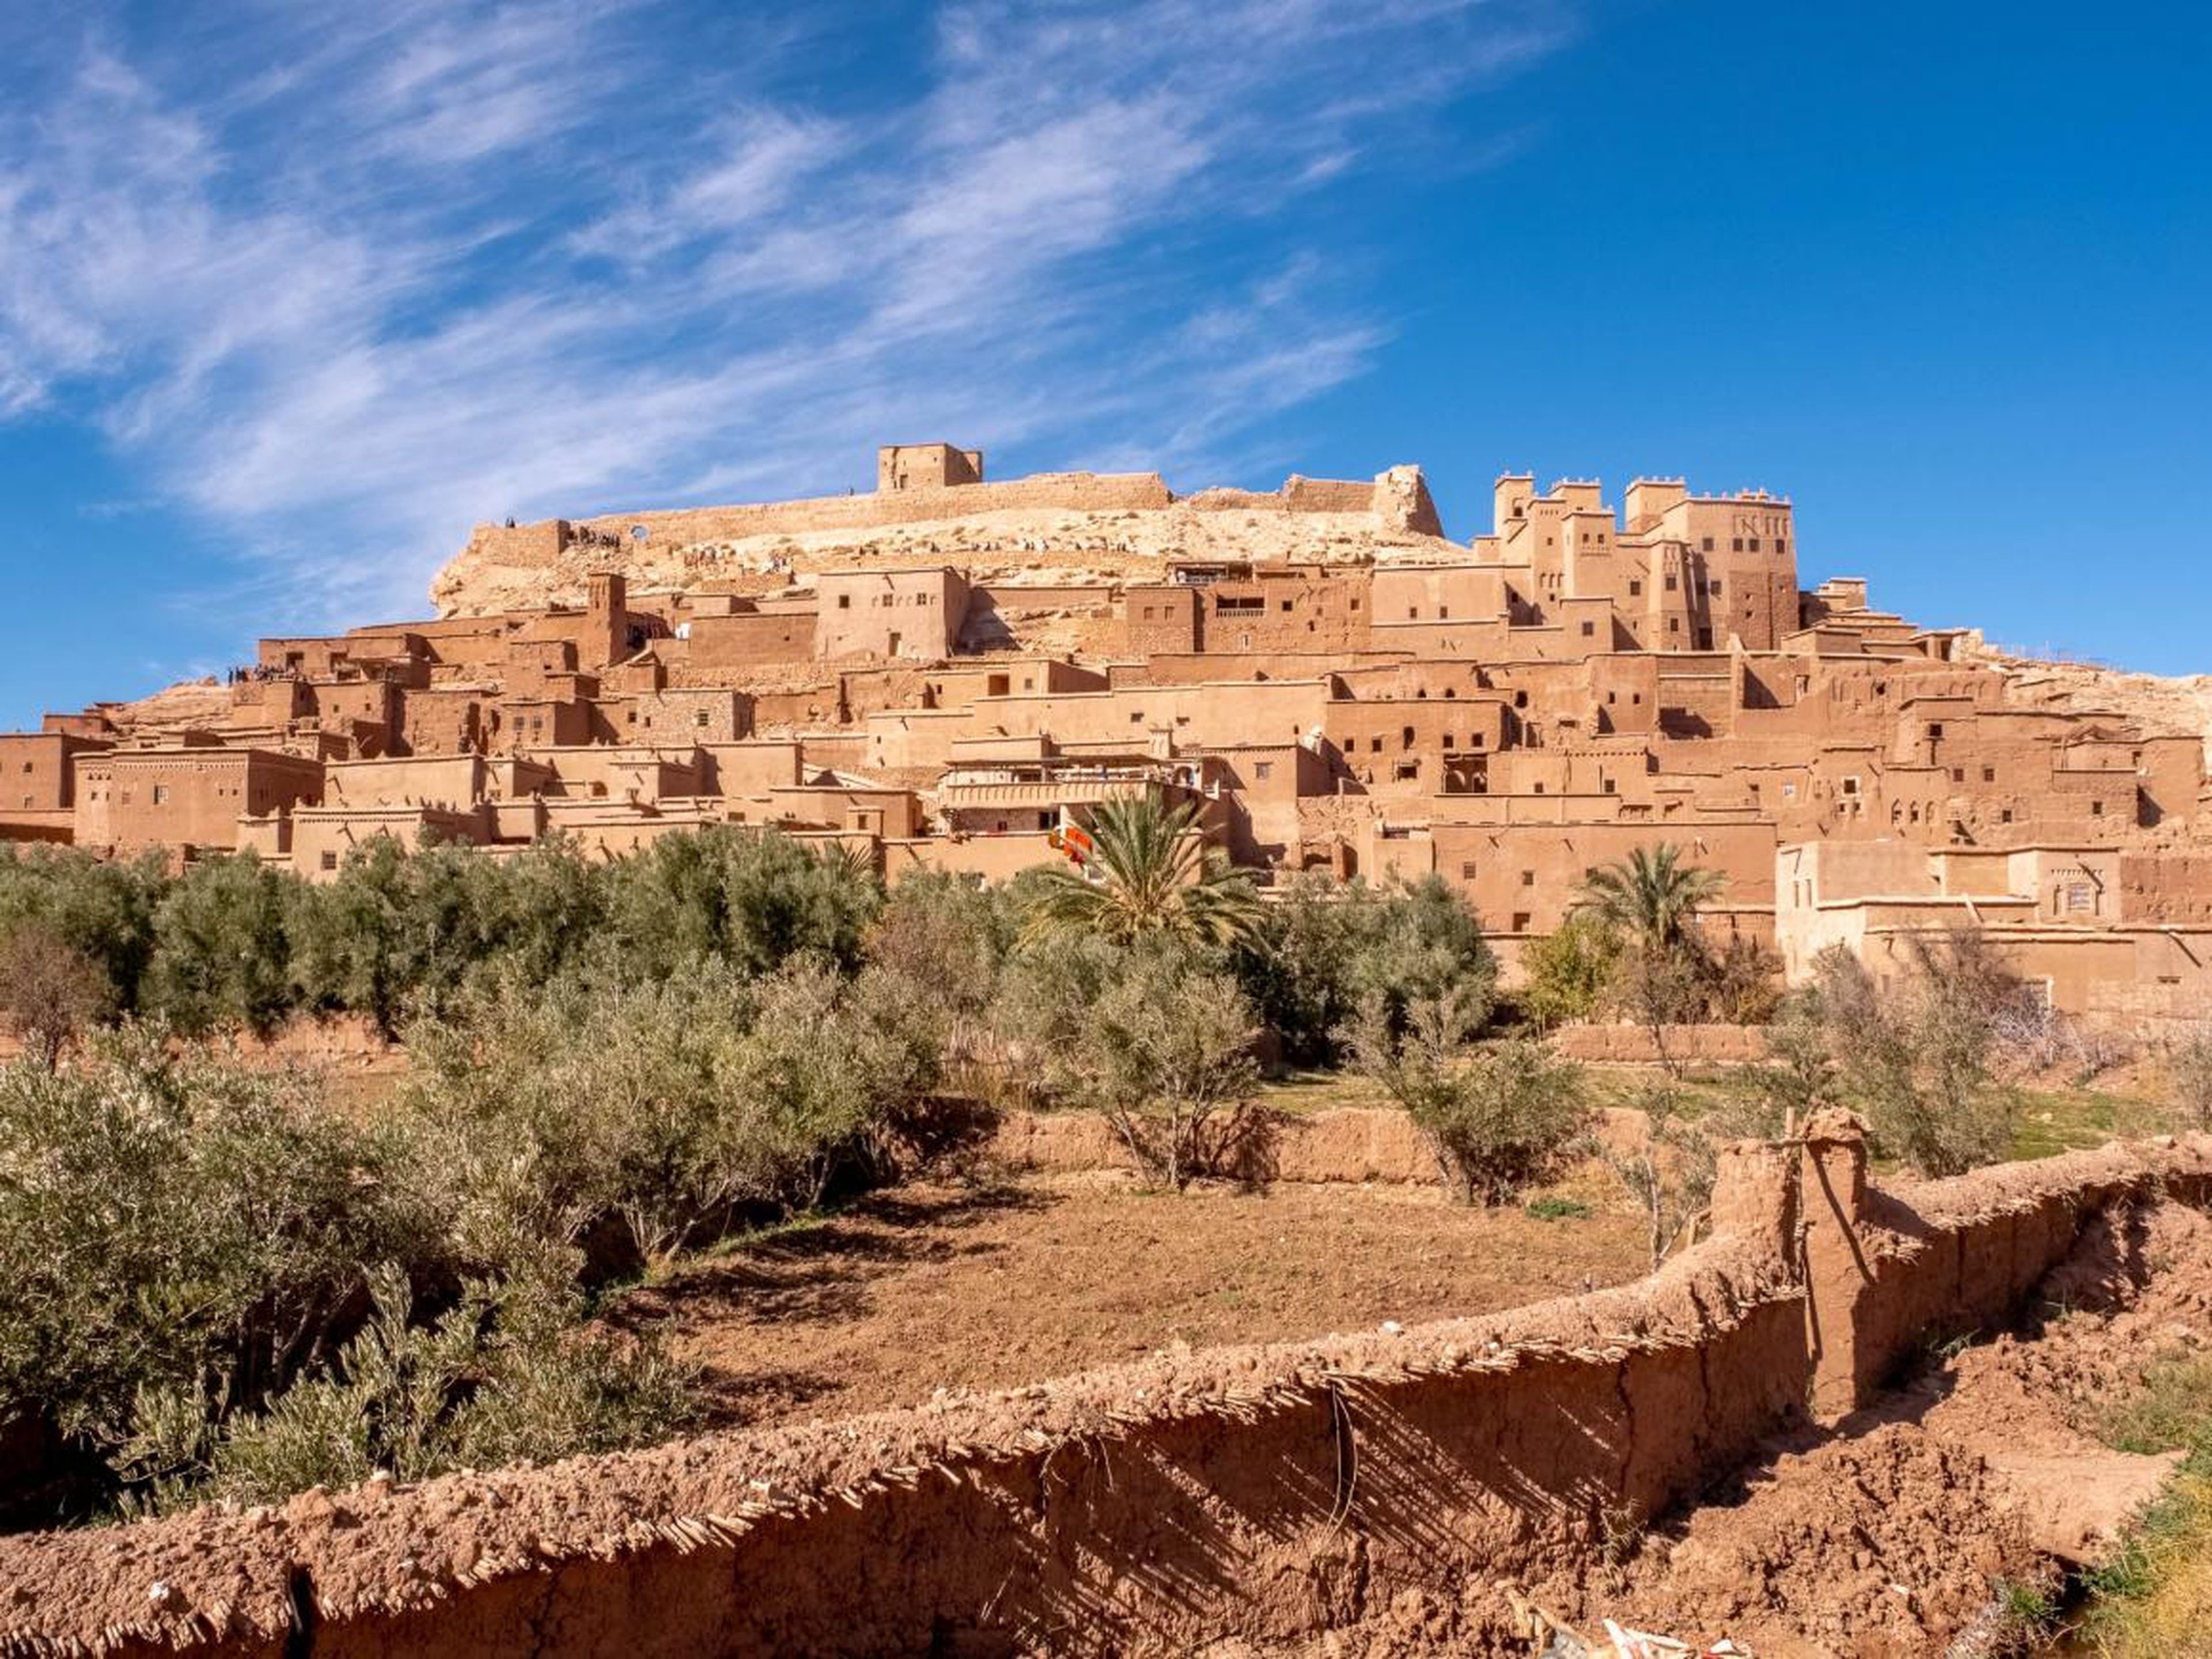 It's immediately clear why so many movies are filmed in Ait Benhaddou when you visit.